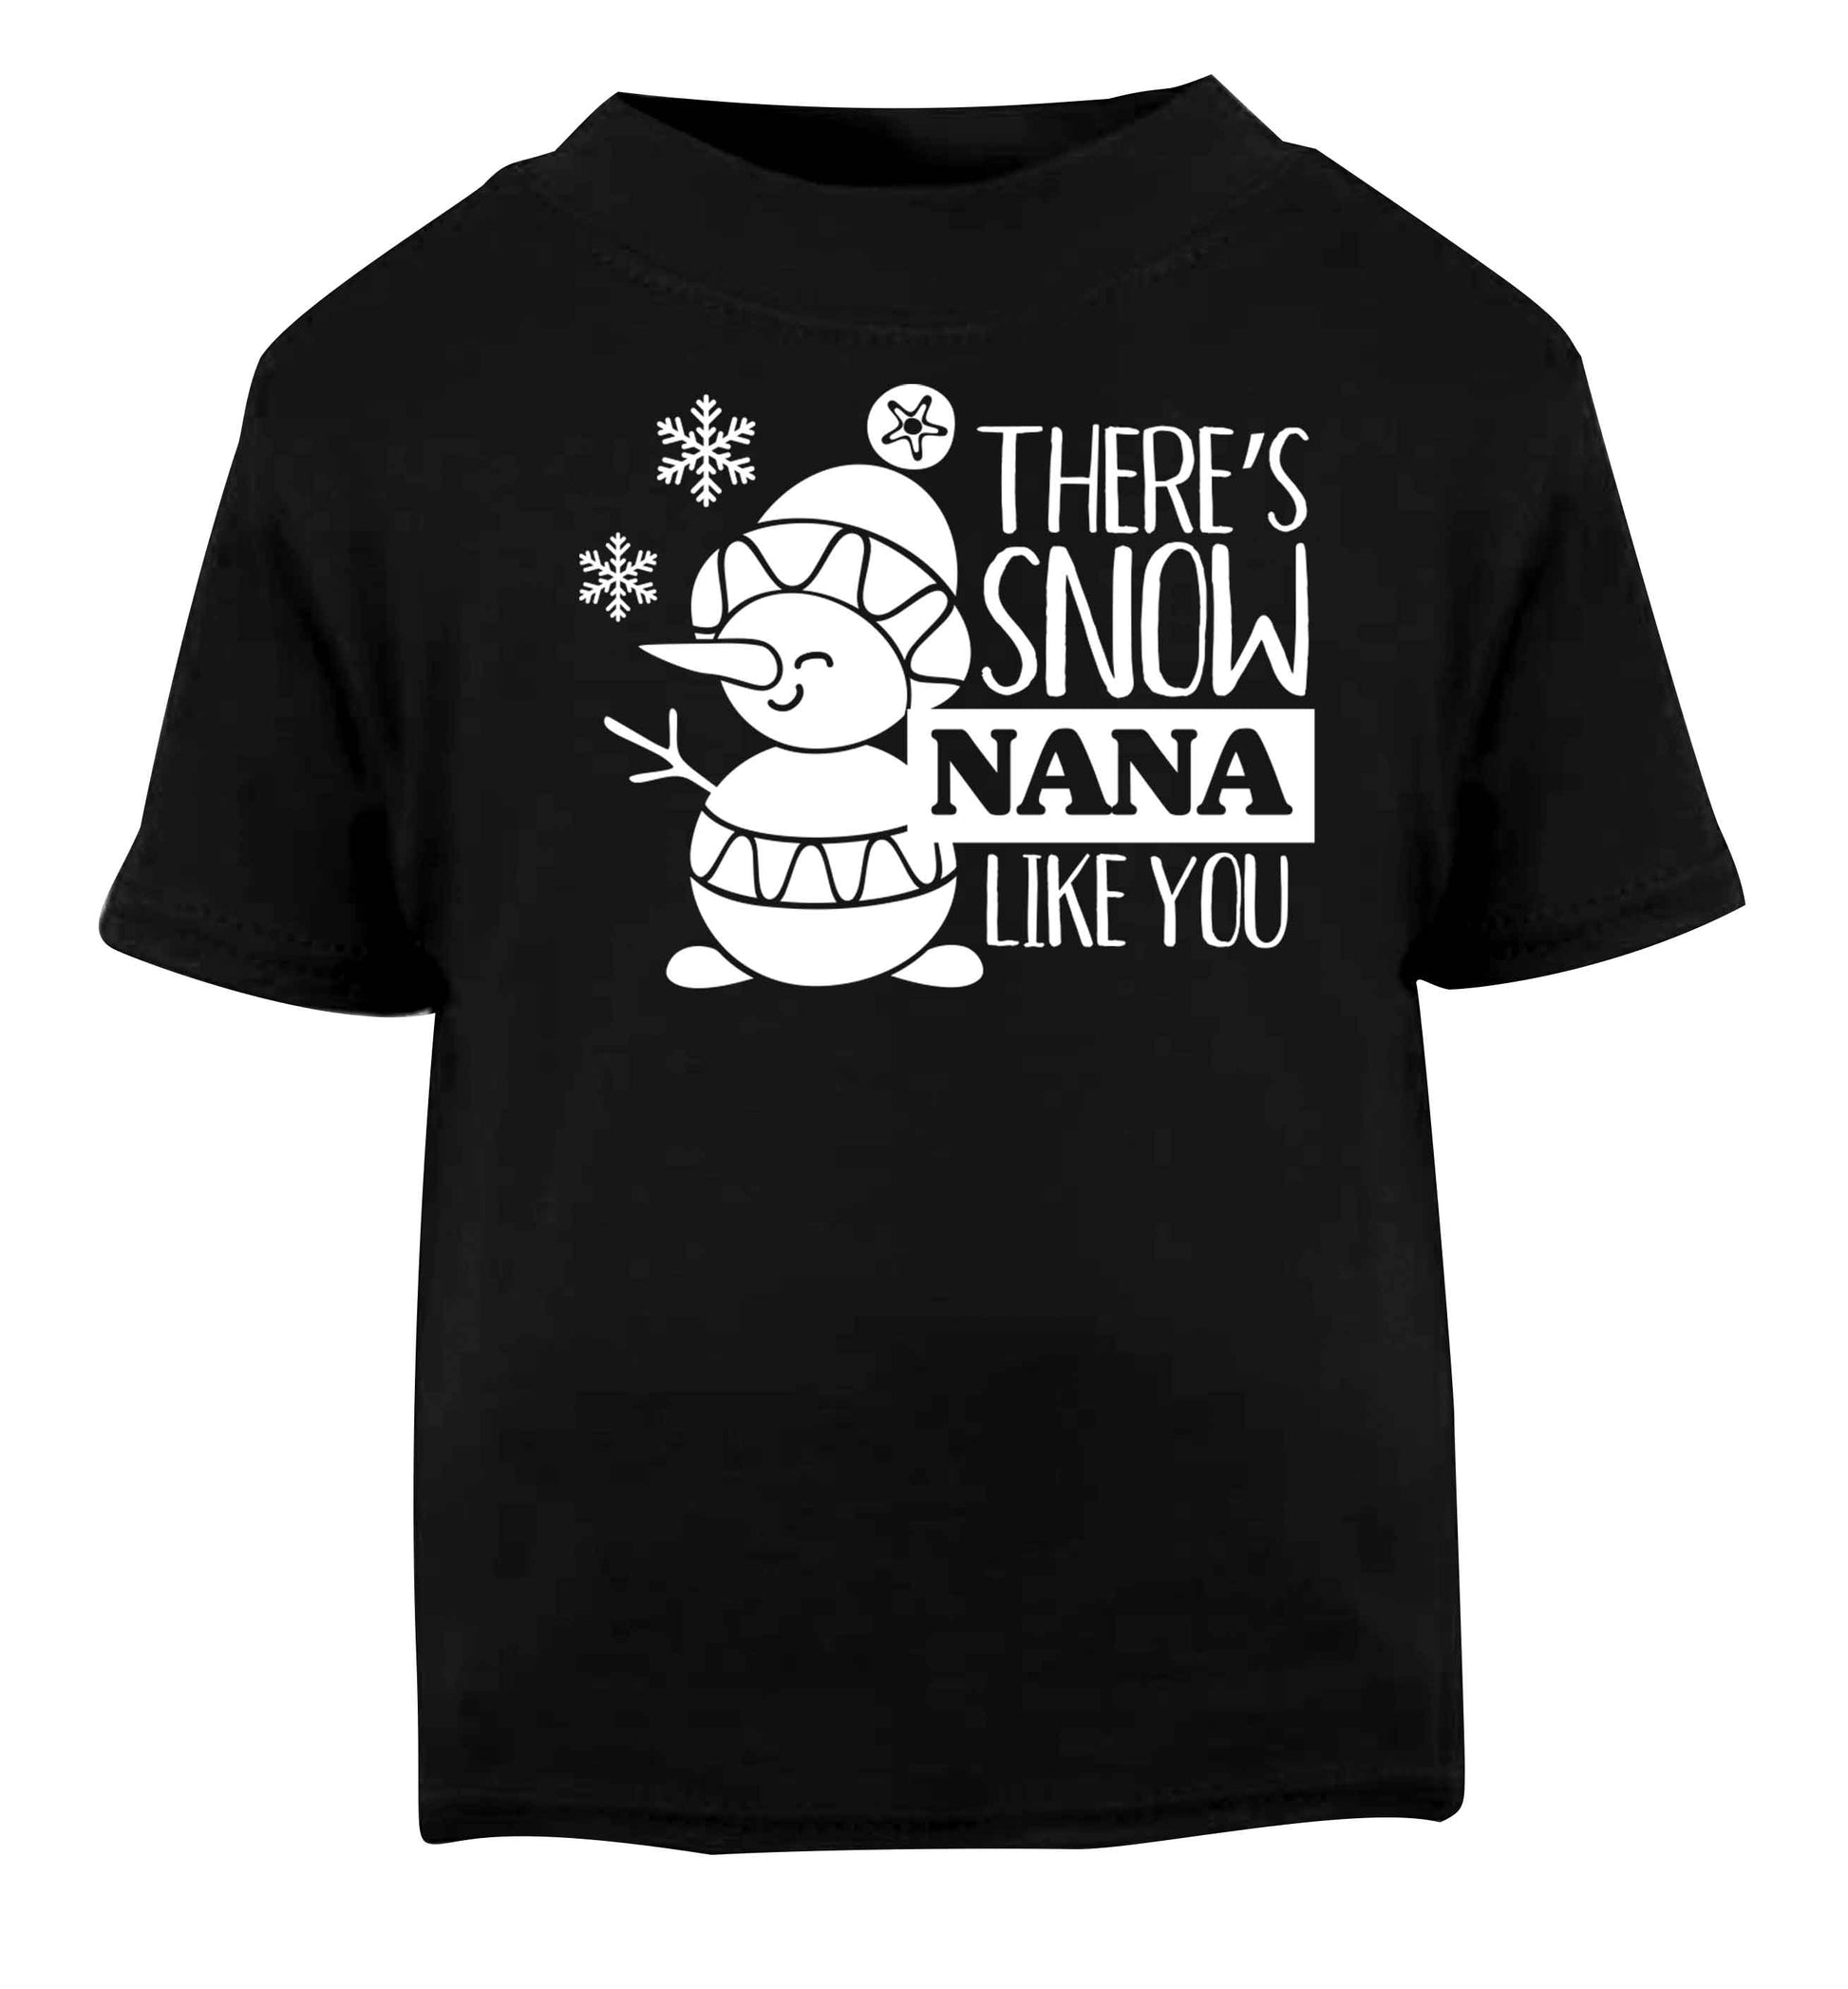 There's snow nana like you Black baby toddler Tshirt 2 years